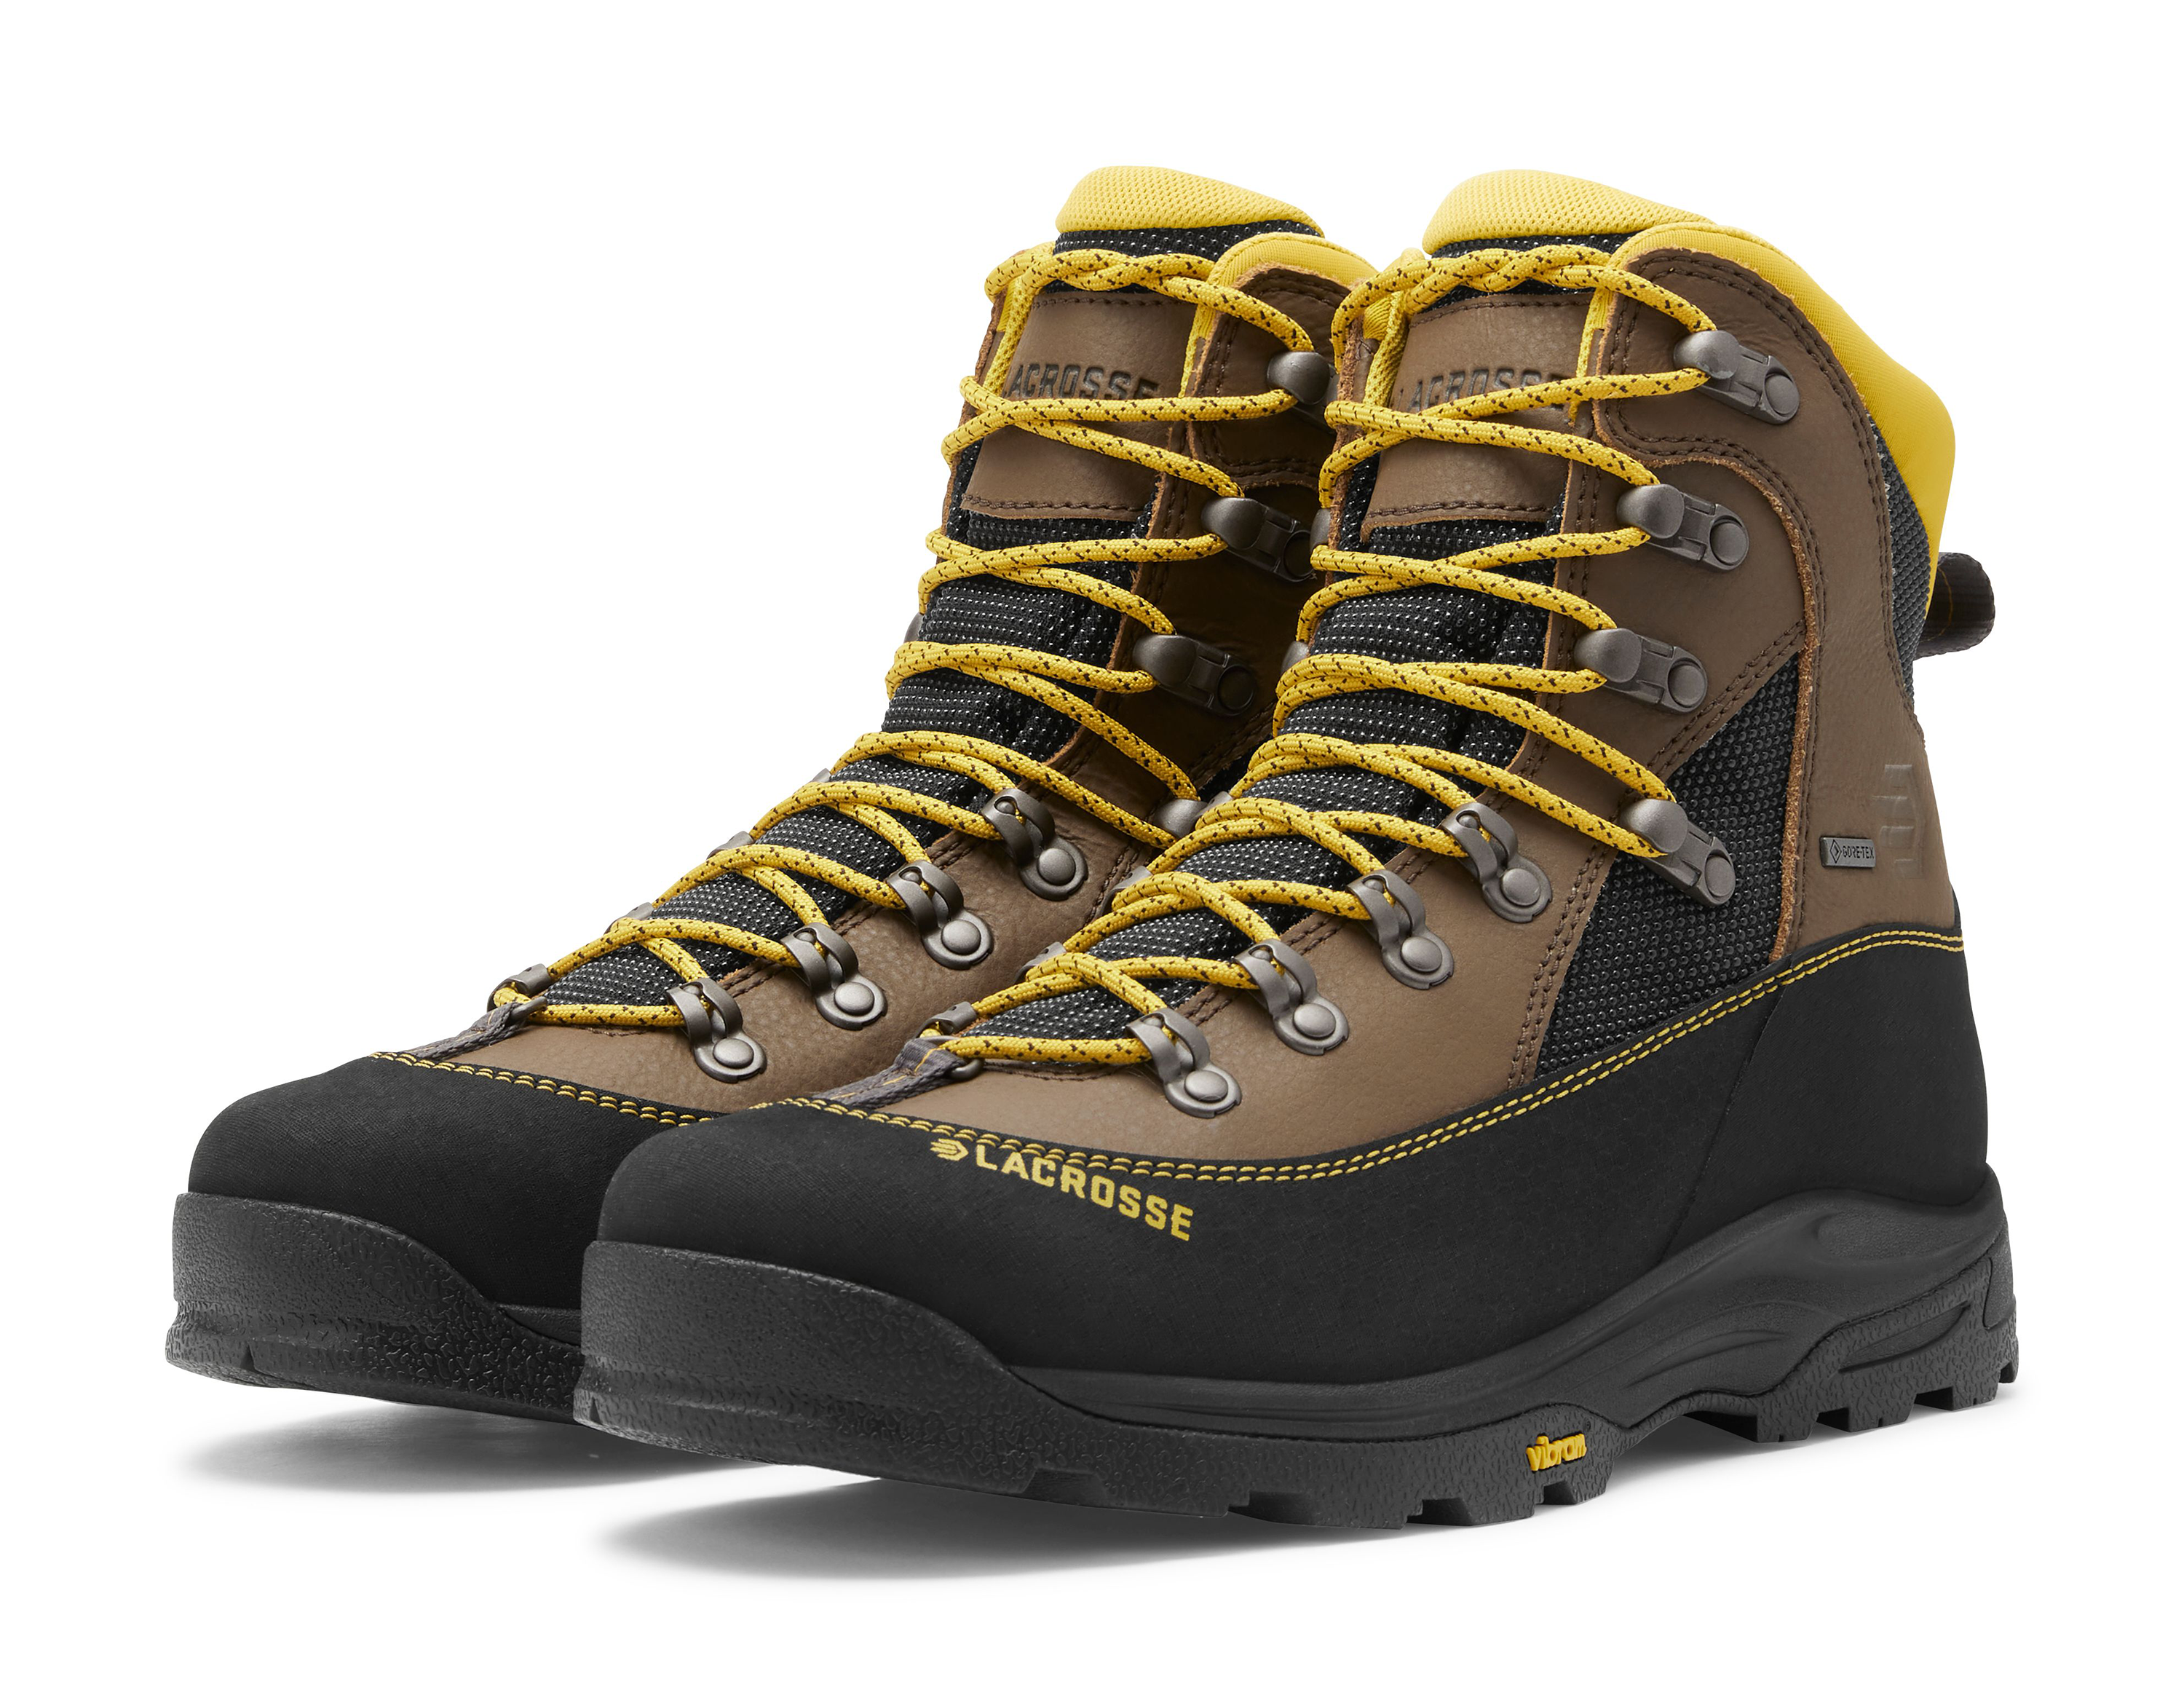 LaCrosse Ursa MS GORE-TEX Hunting Boots for Men - Brown/Gold - 15M